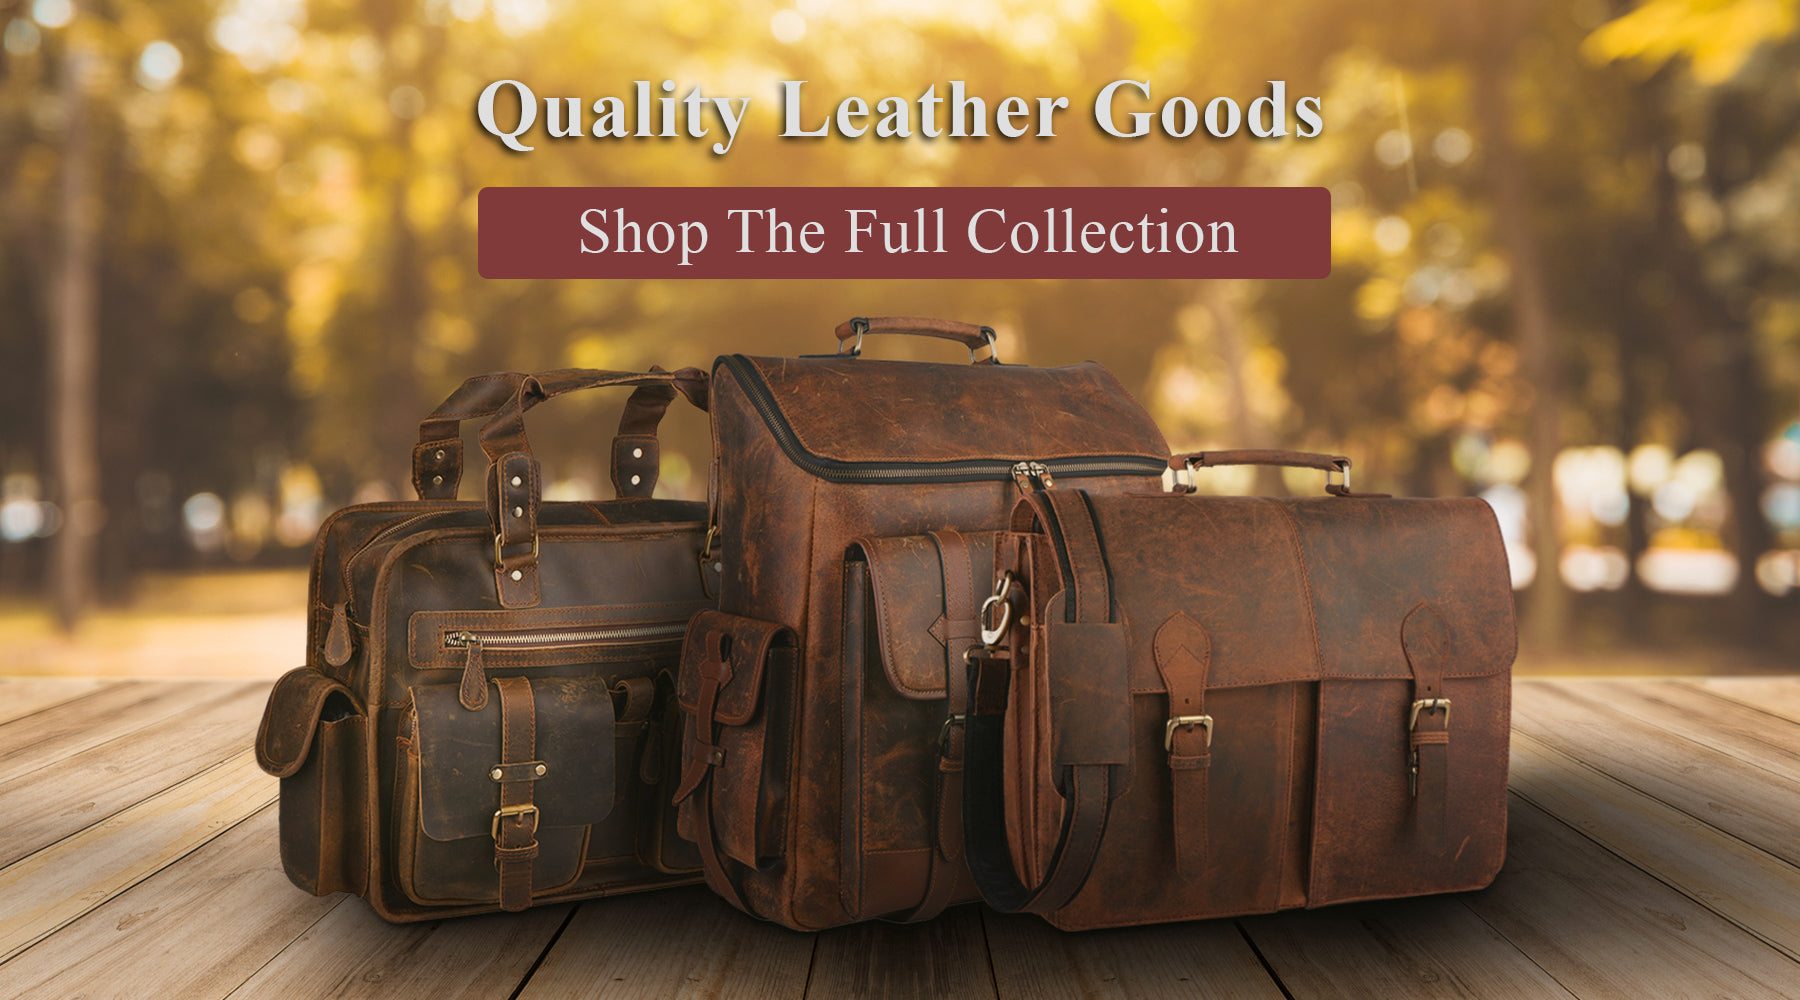 Everything You Need to Know About Buffalo Leather